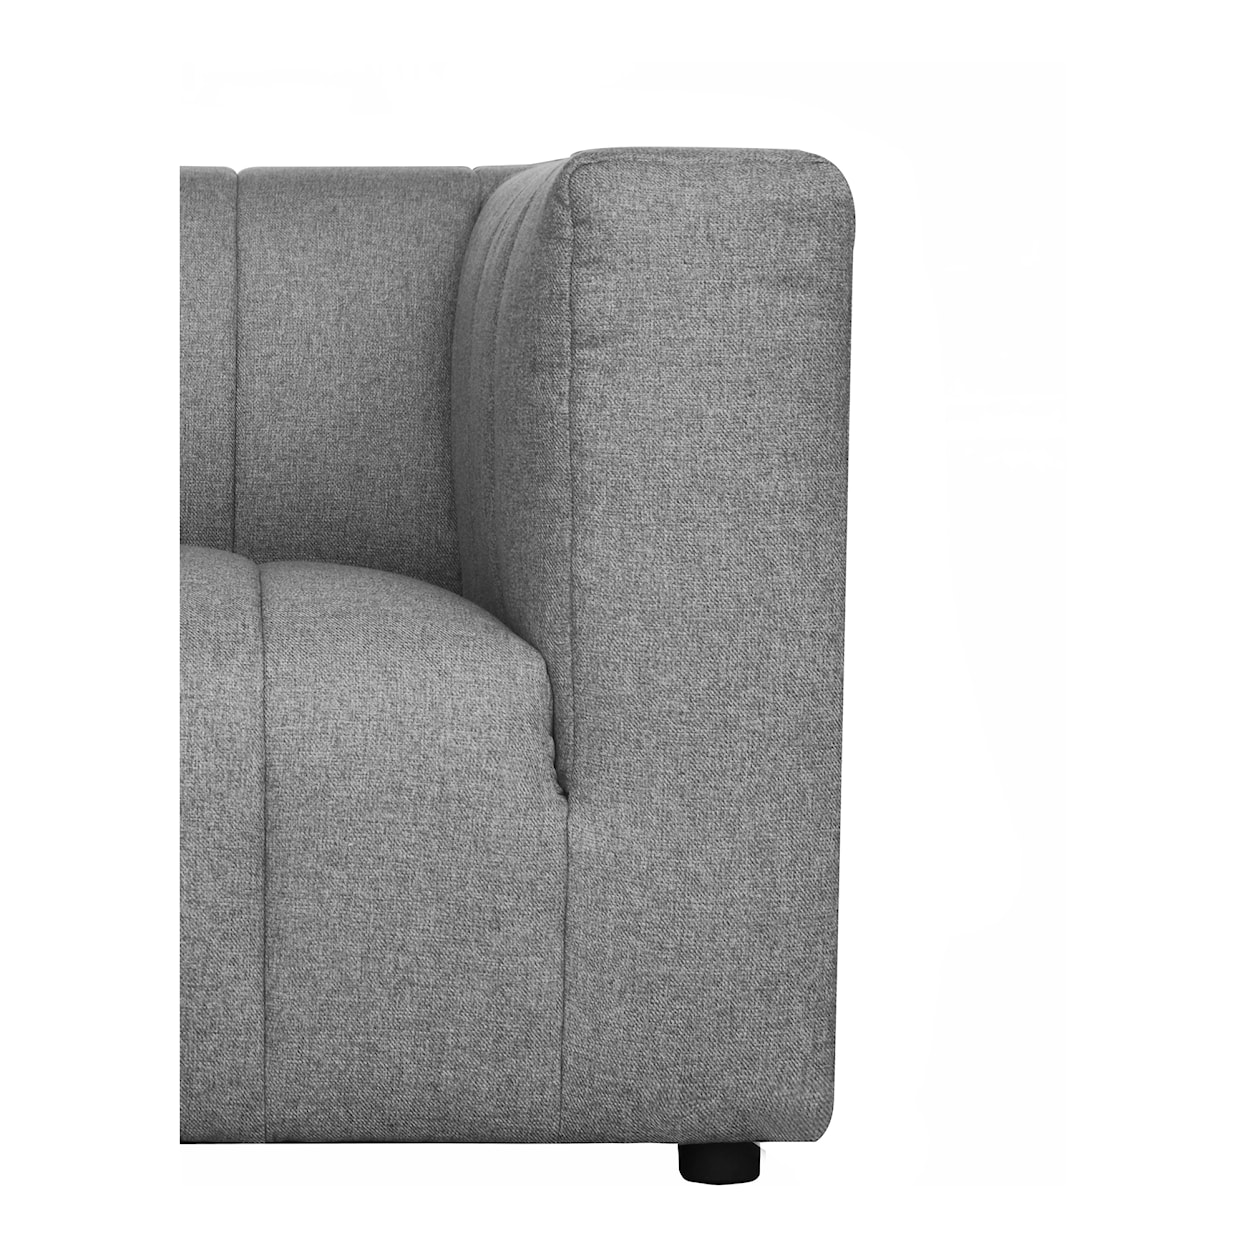 Moe's Home Collection Lyric Lyric Arm Chair Right Grey